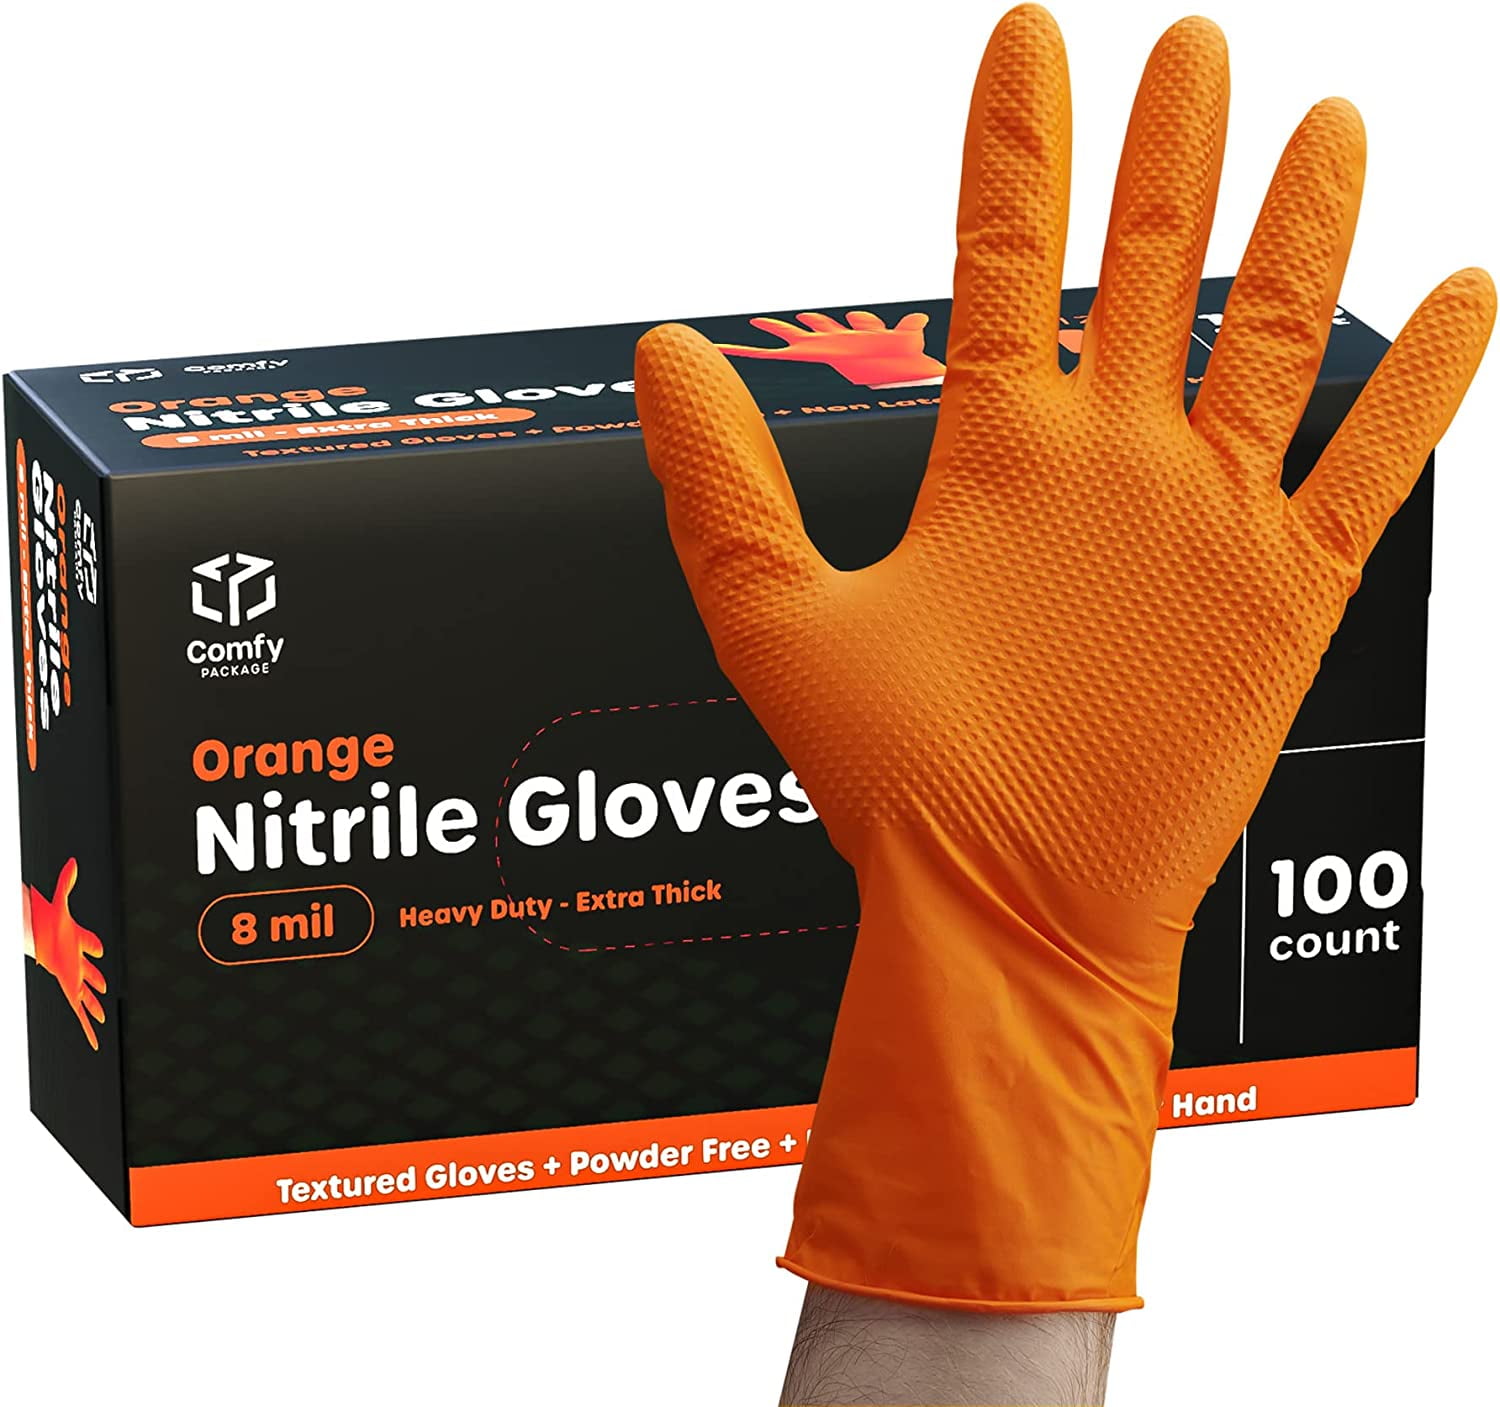 Comfy Package 8 Mil Orange Nitrile Gloves Disposable Latex Free